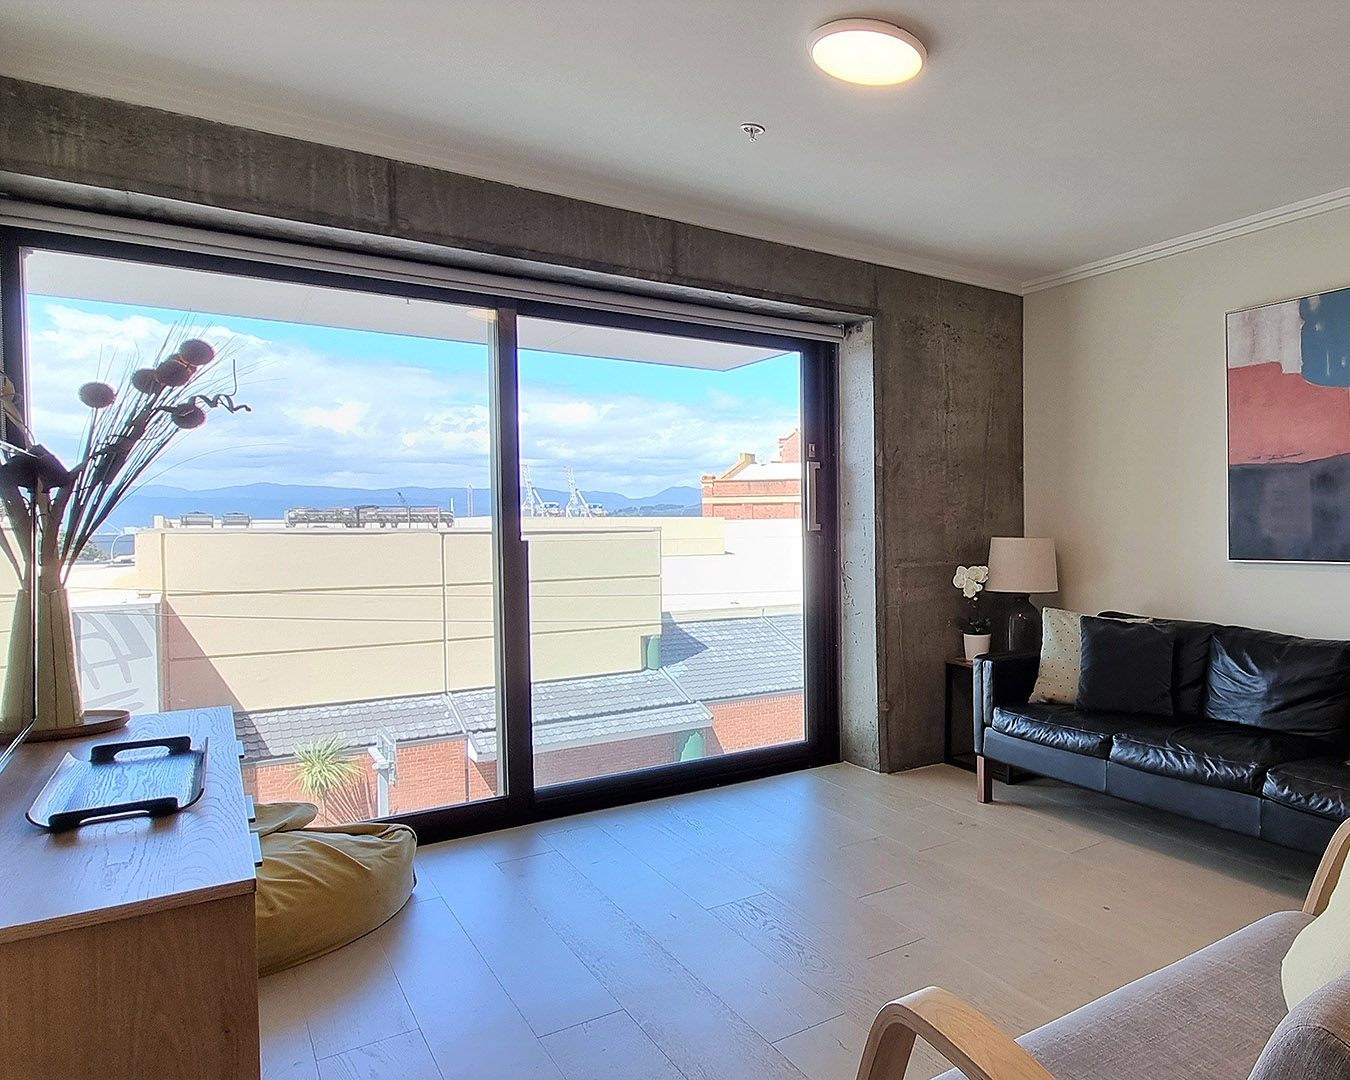 One of the best airbnbs in Wellington, this image is a view of of the inviting king beds at the Premium City Apartment in Thorndon.